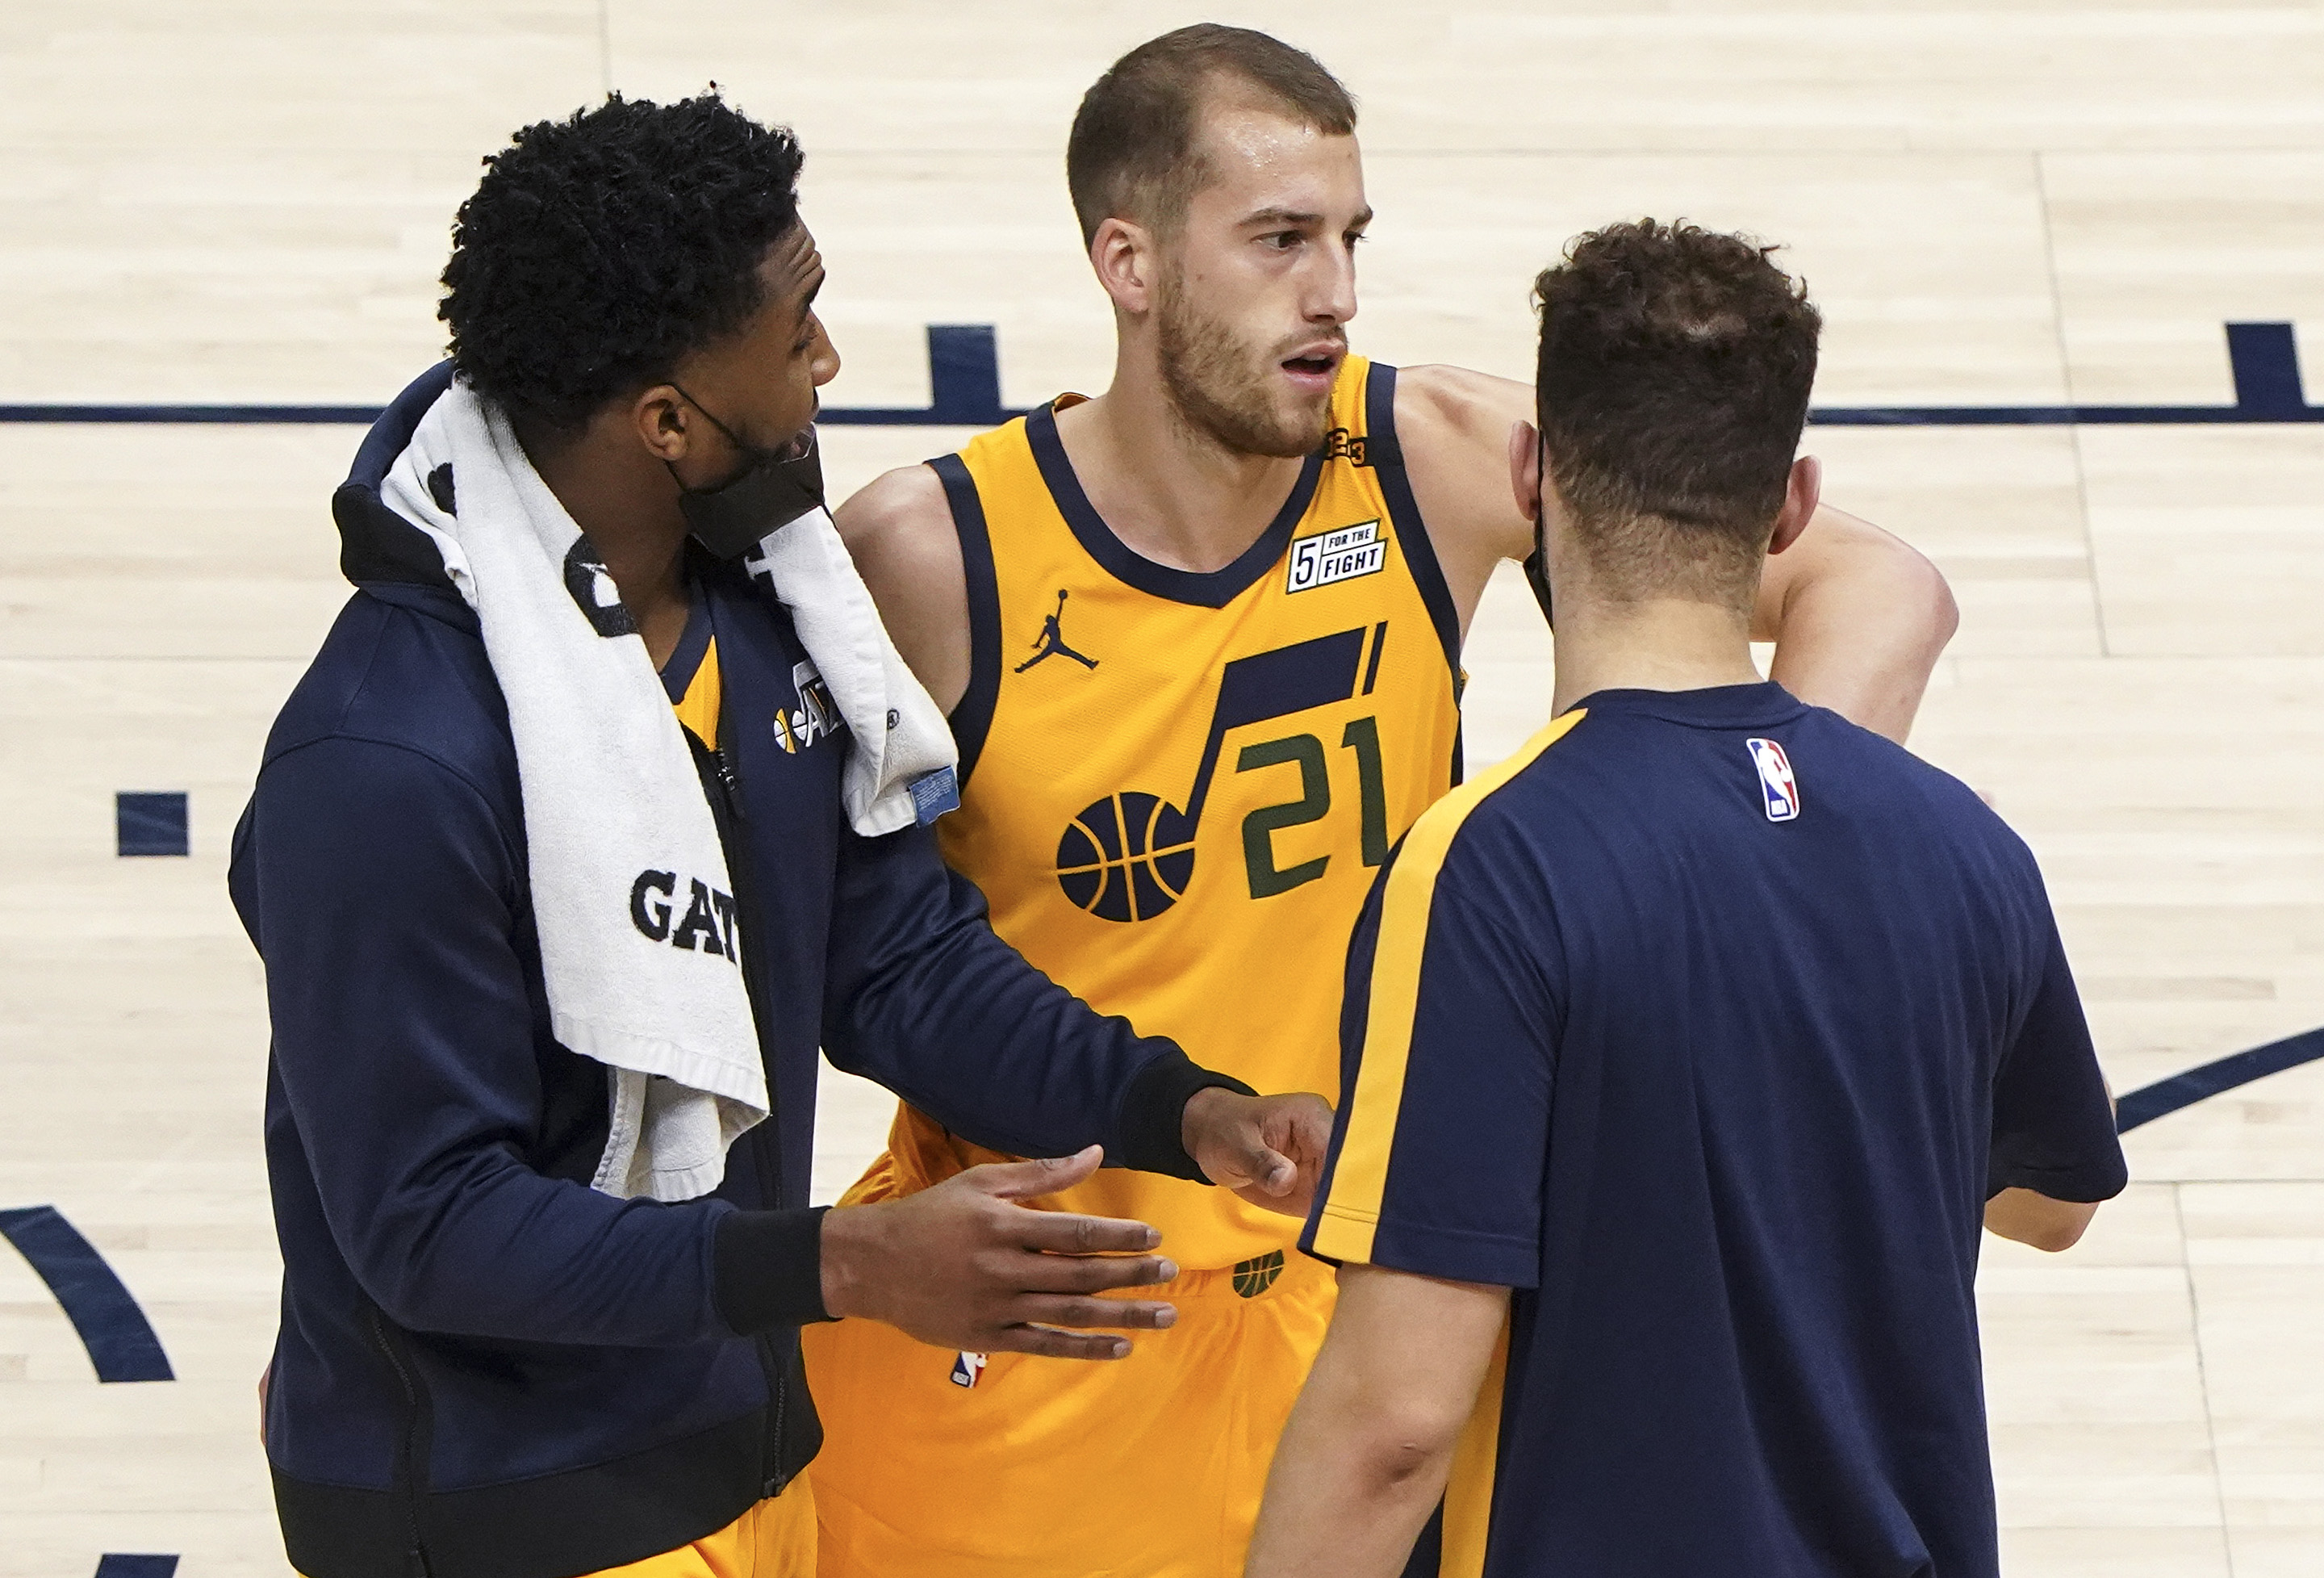 Gordon Monson: Utah Jazz fans are unflaggingly faithful. They deserve a  title run. Does this team?